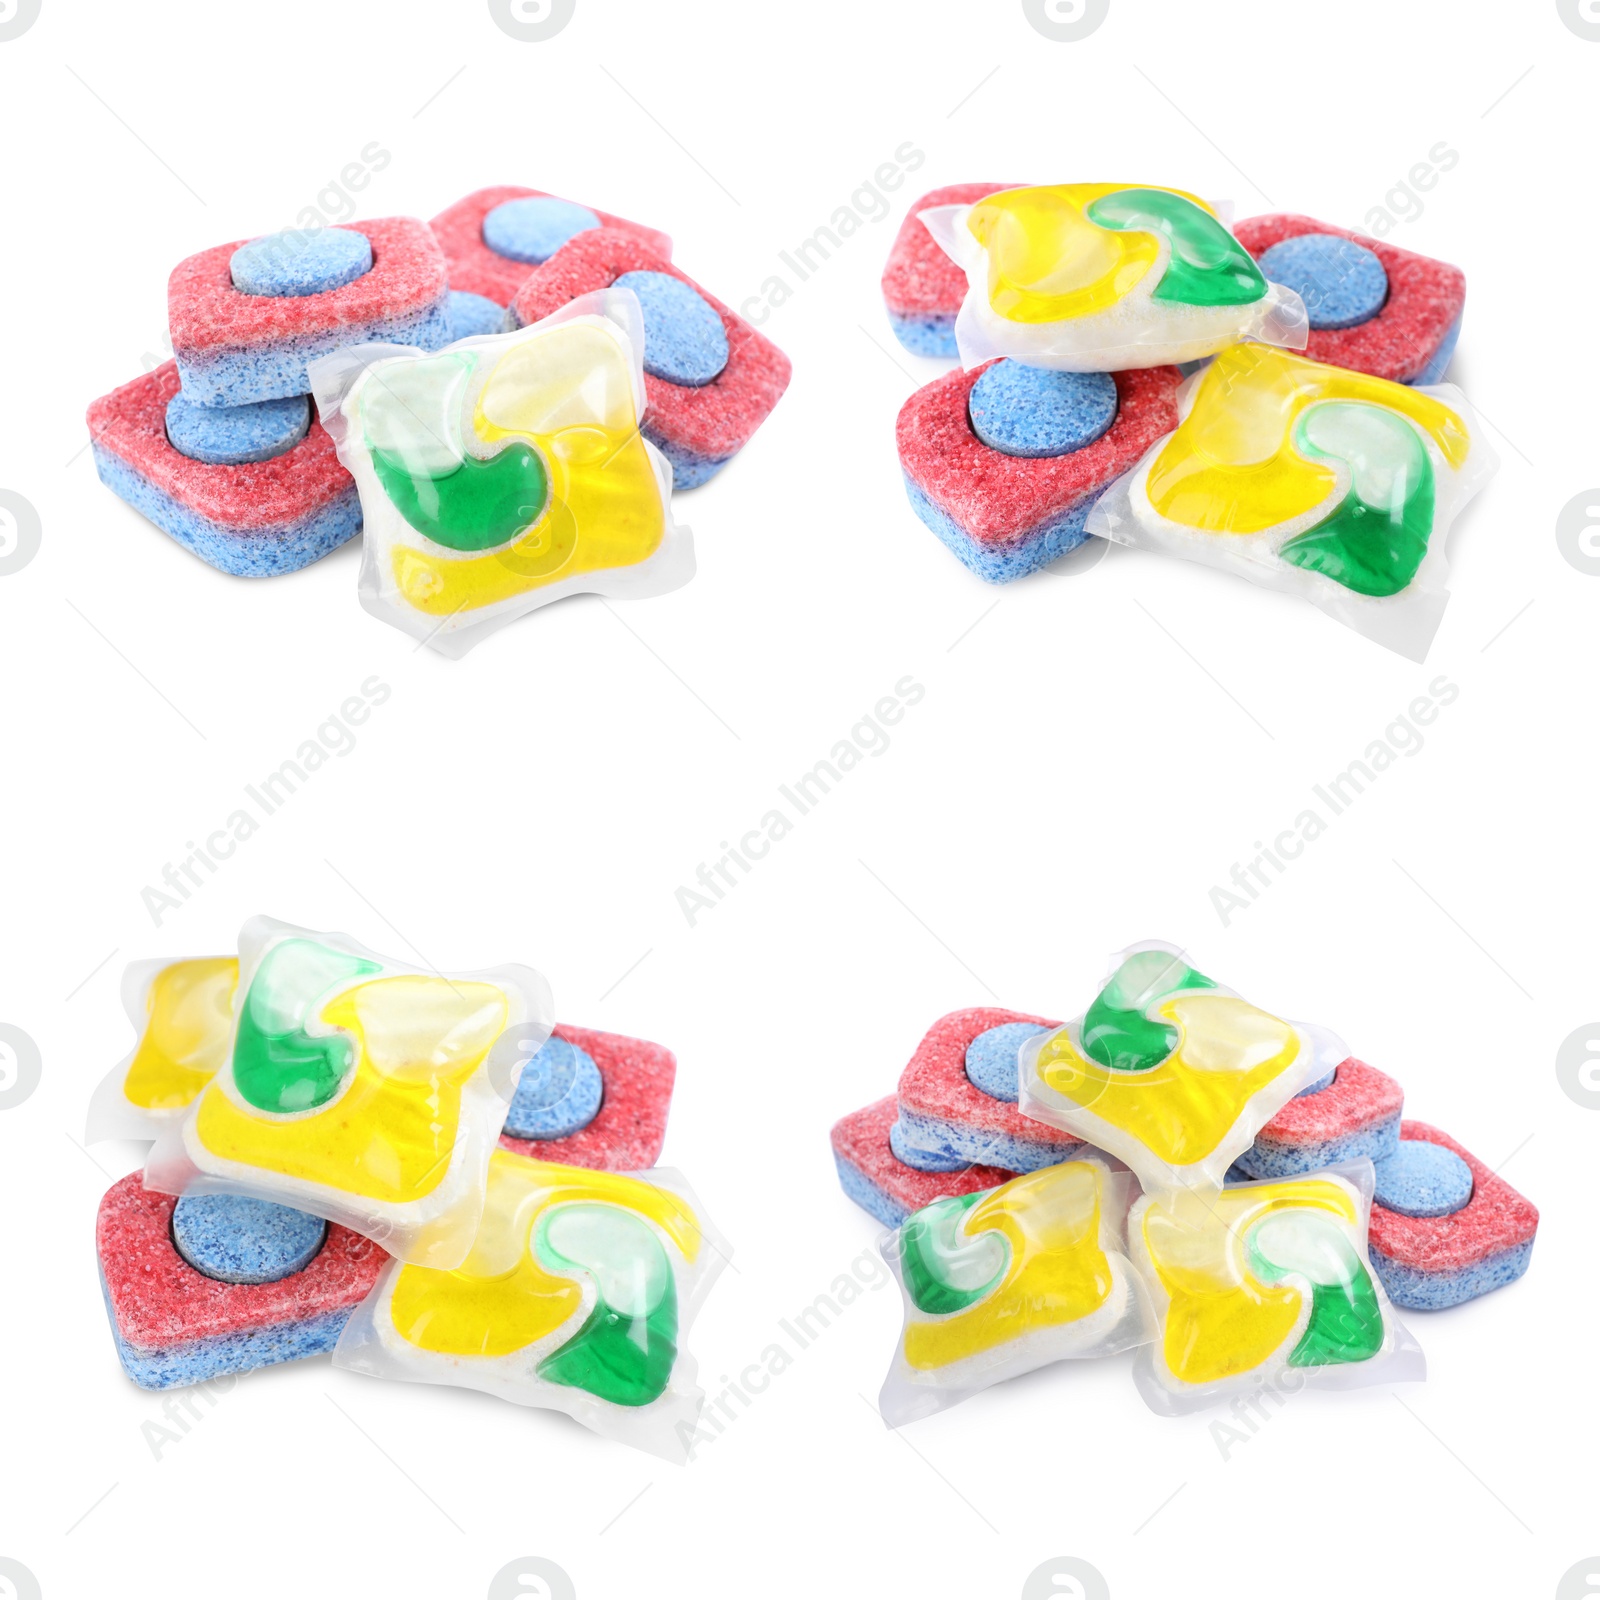 Image of Set with dishwasher detergent tablets and gel capsules on white background 